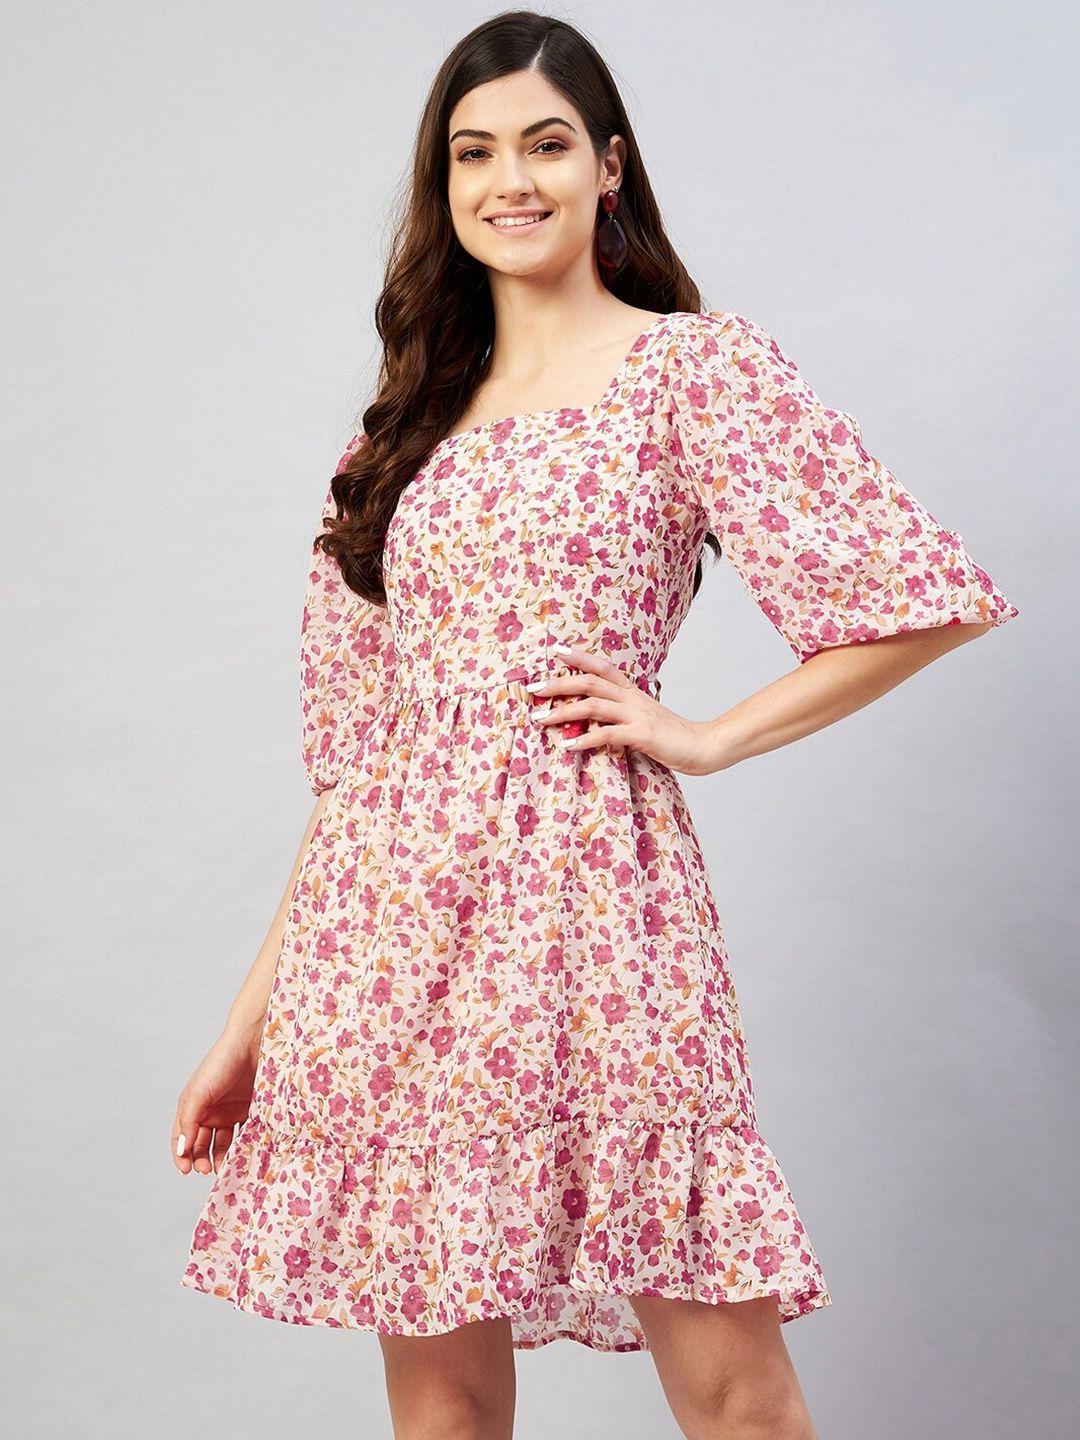 marie claire pink floral georgette dress